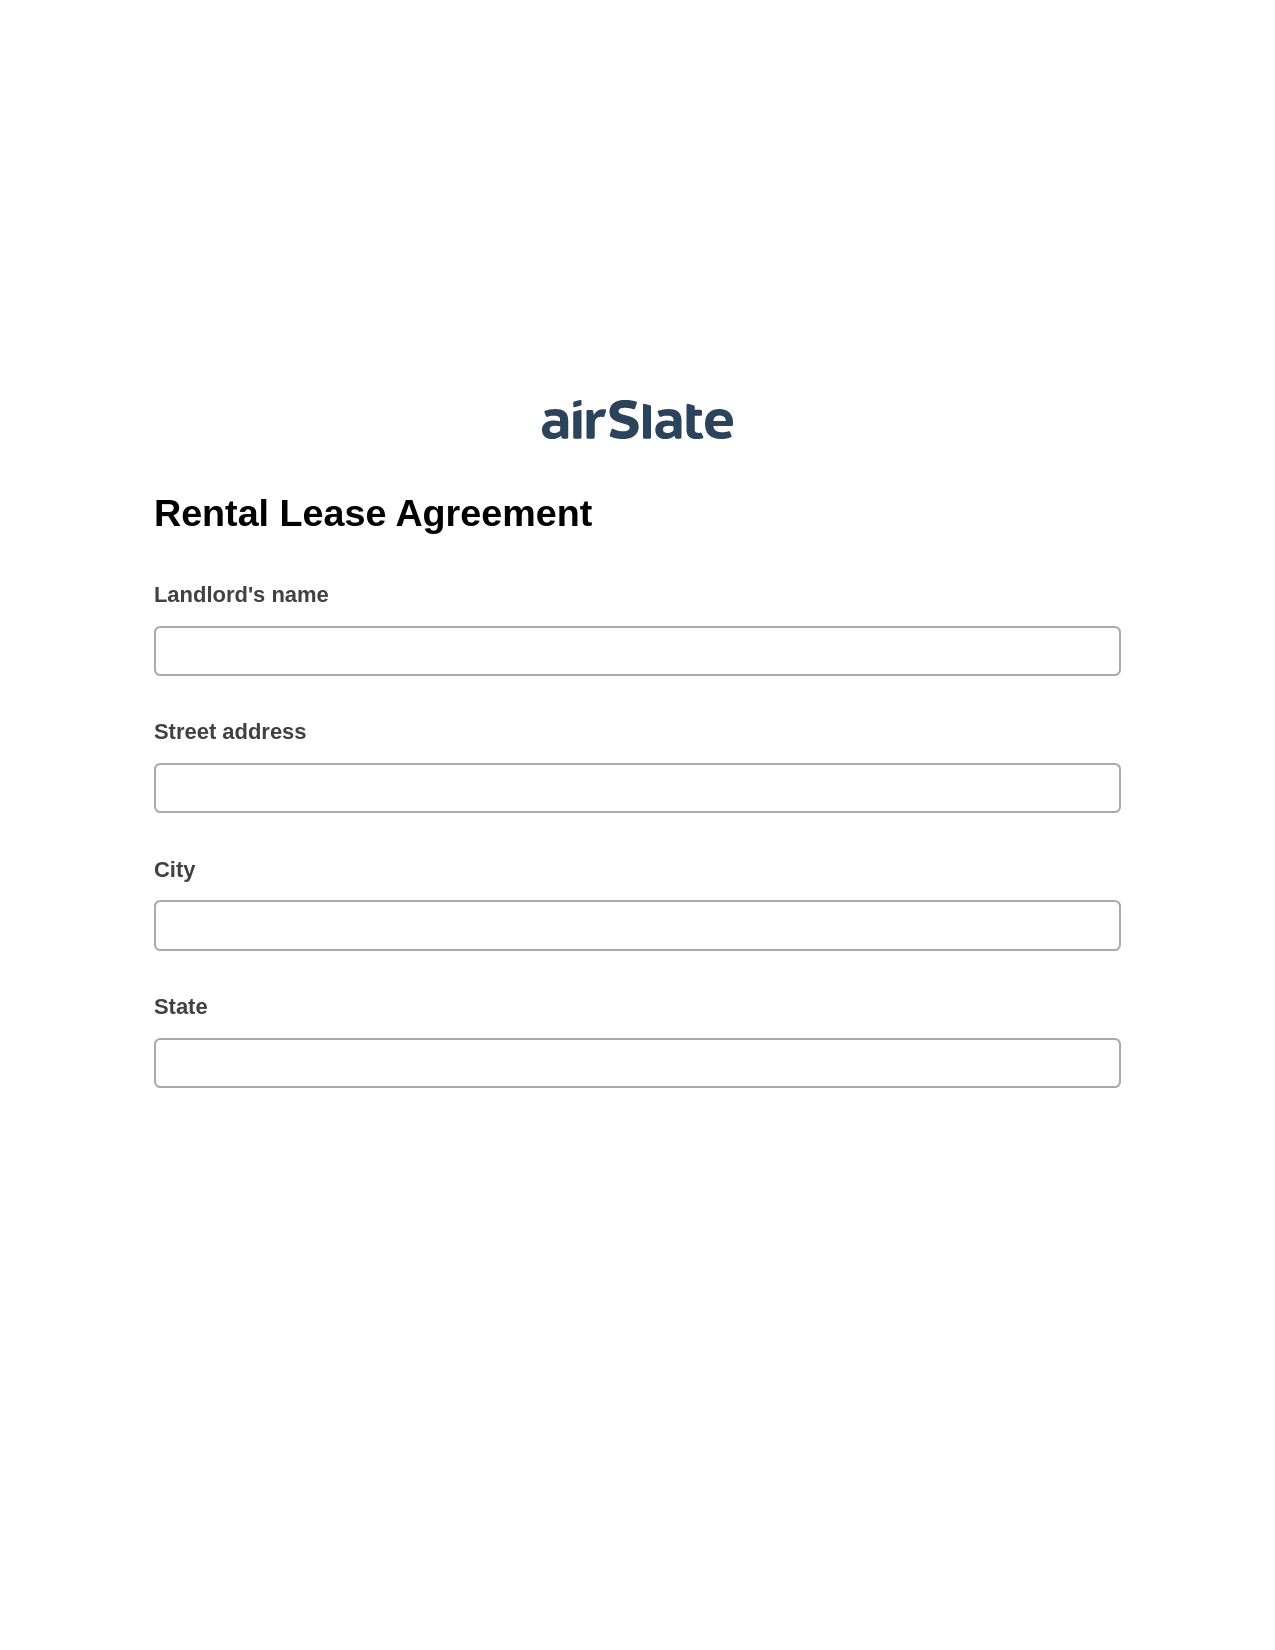 Rental Lease Agreement Pre-fill Dropdown from Airtable, Jira Bot, OneDrive Bot